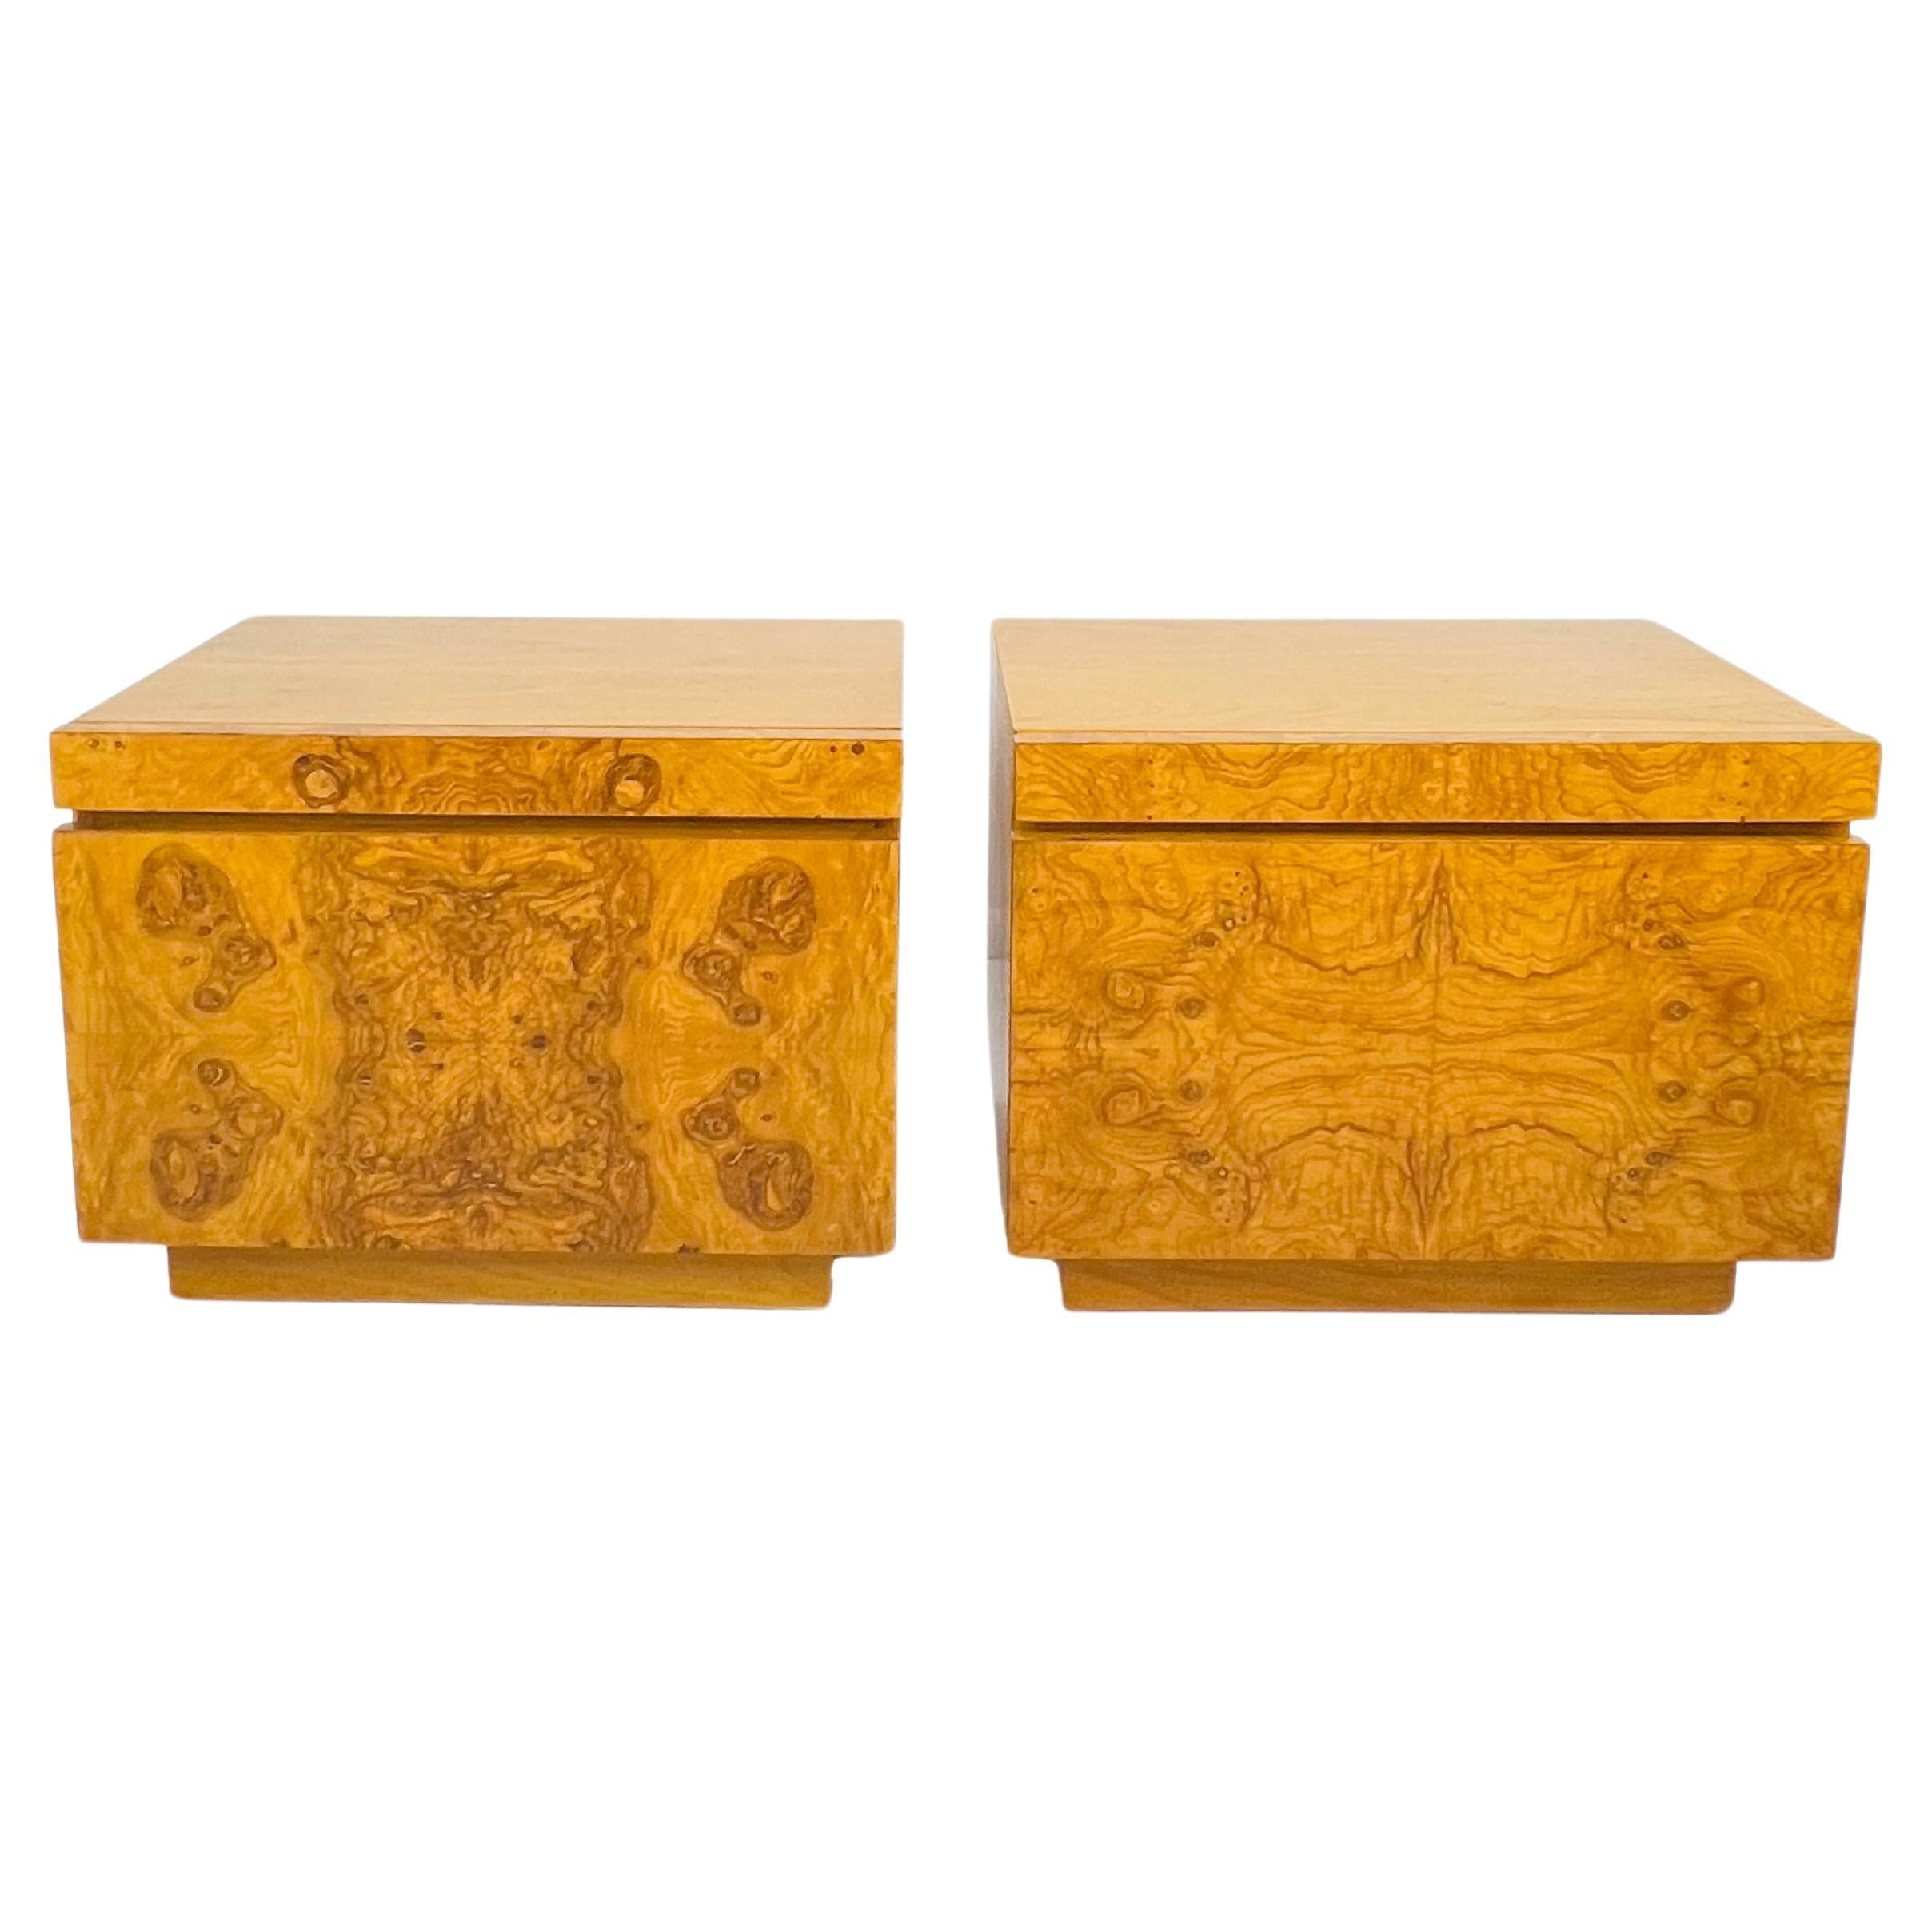 Pair of Burl Wood Nightstands by Milo Baughman for Lane For Sale